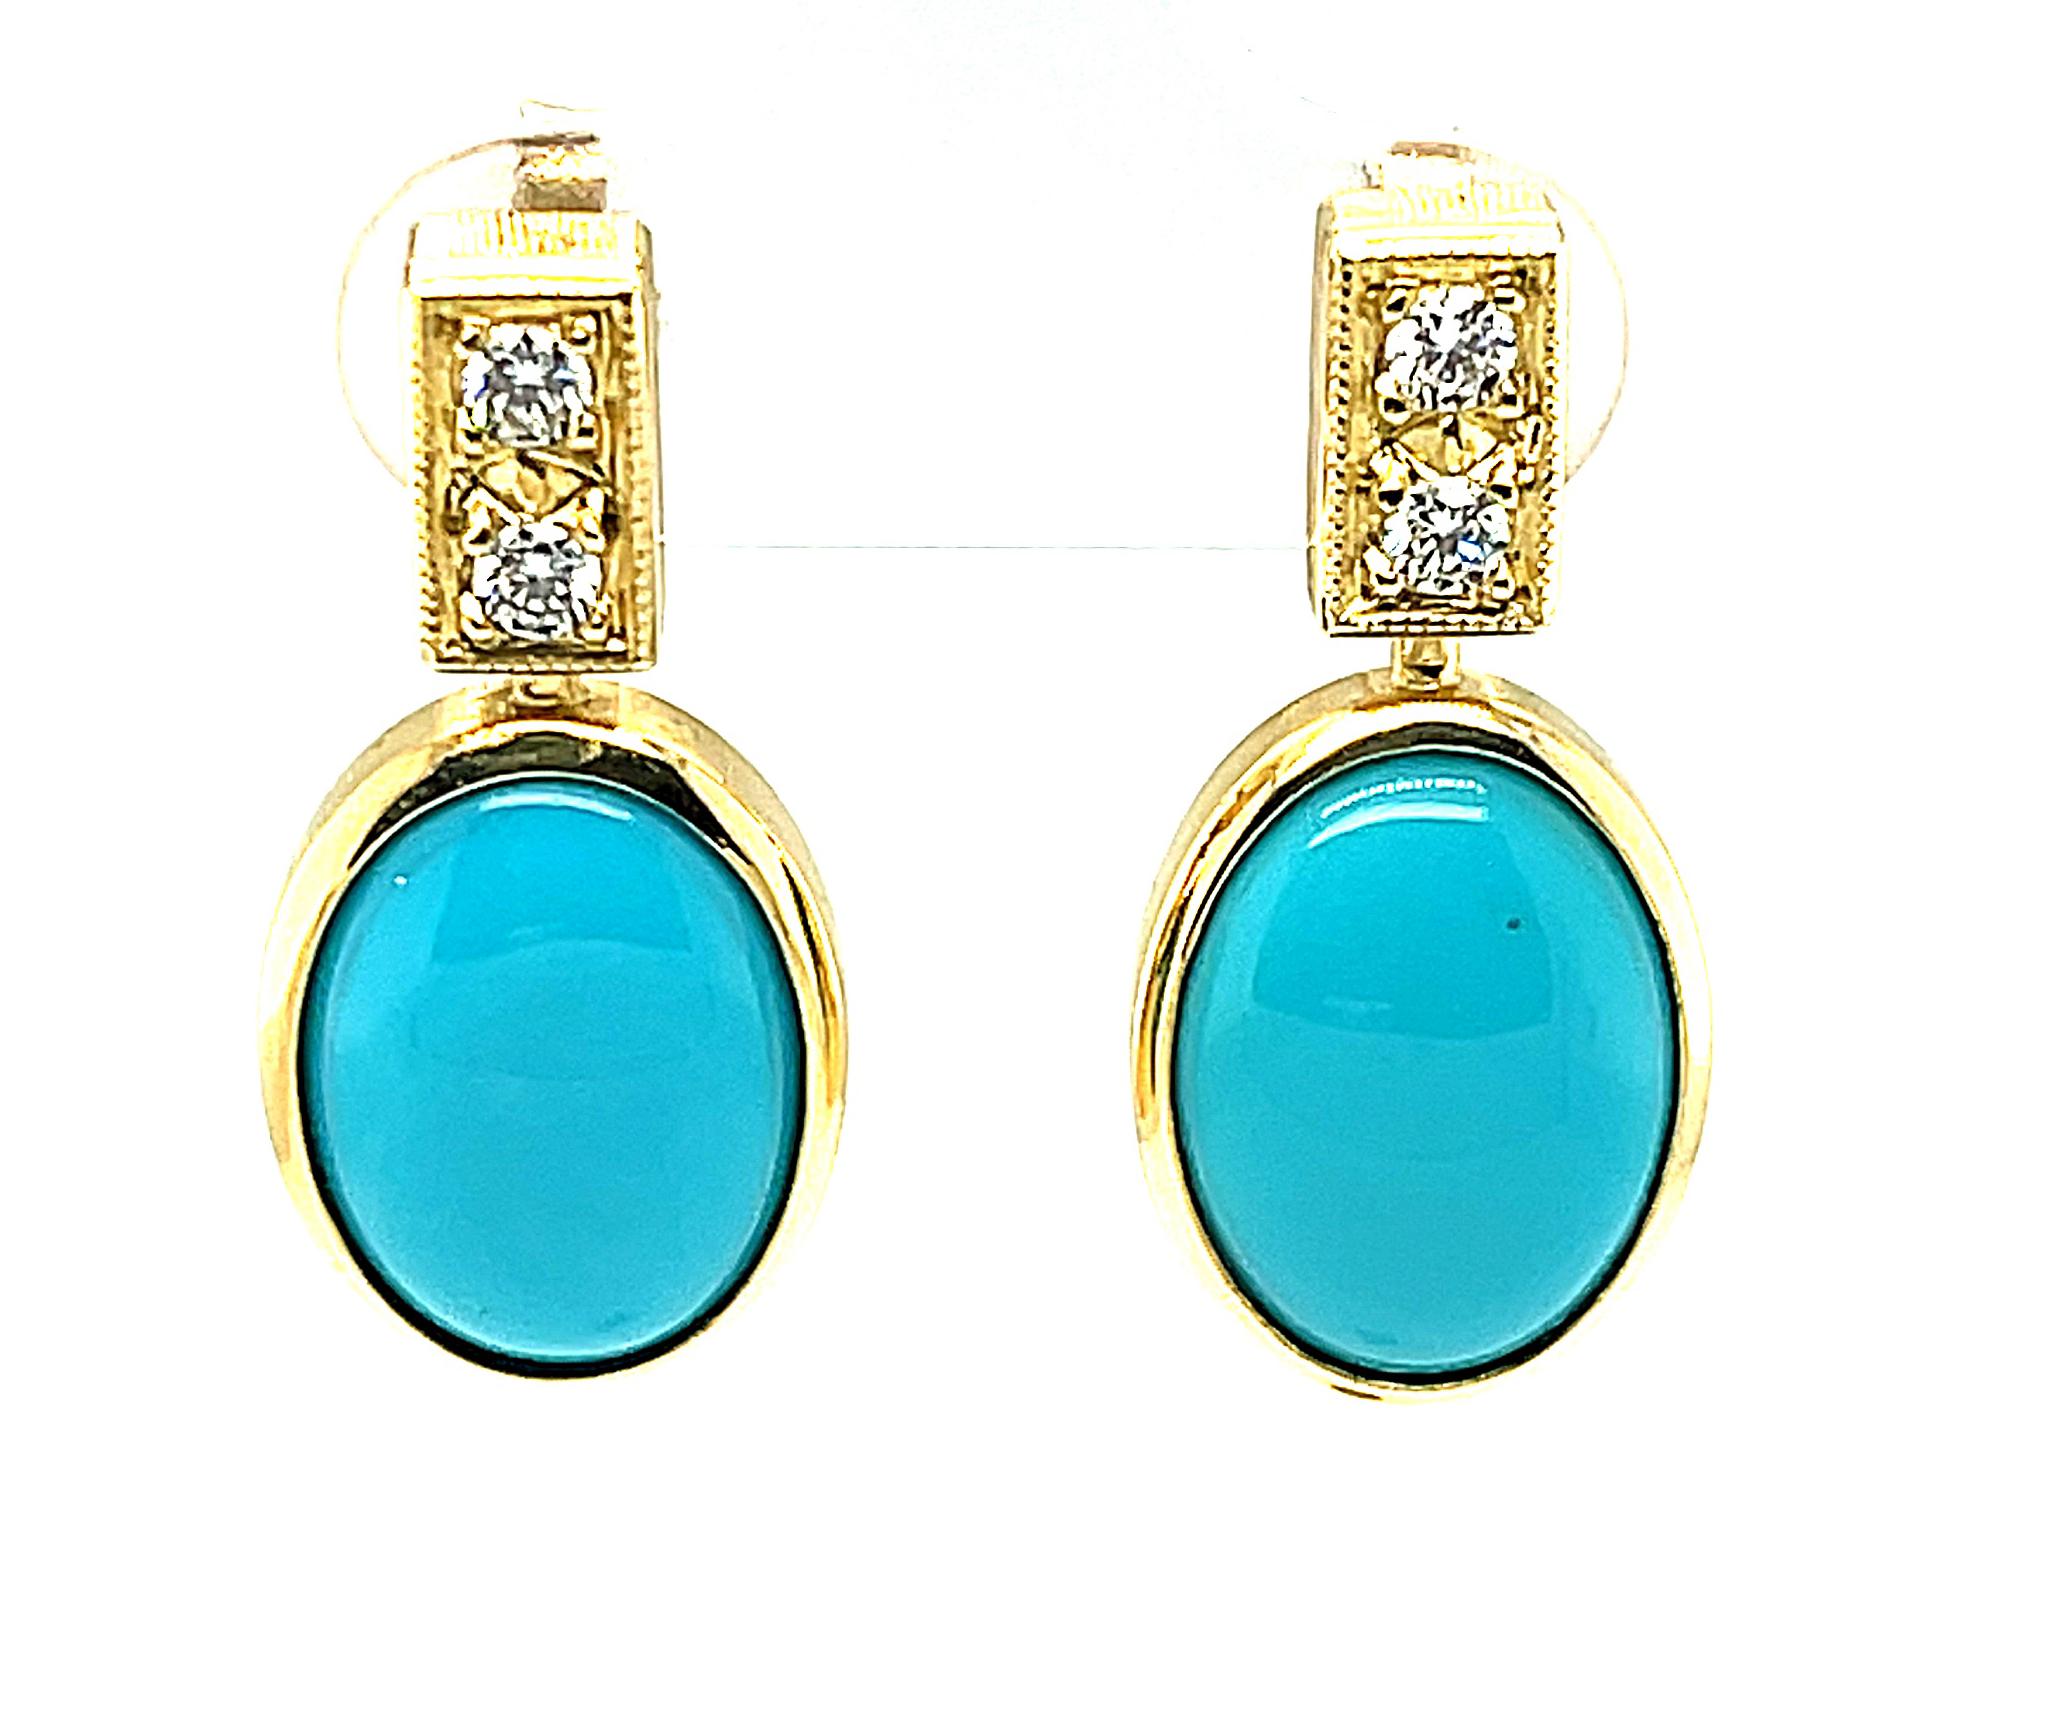 Turquoise from the Sleeping Beauty Mine (like the gems is these drop earrings) is the finest there is. The intense, even turquoise blue color is absolutely beautiful., but the mine is no longer producing these fine stones. These earrings feature